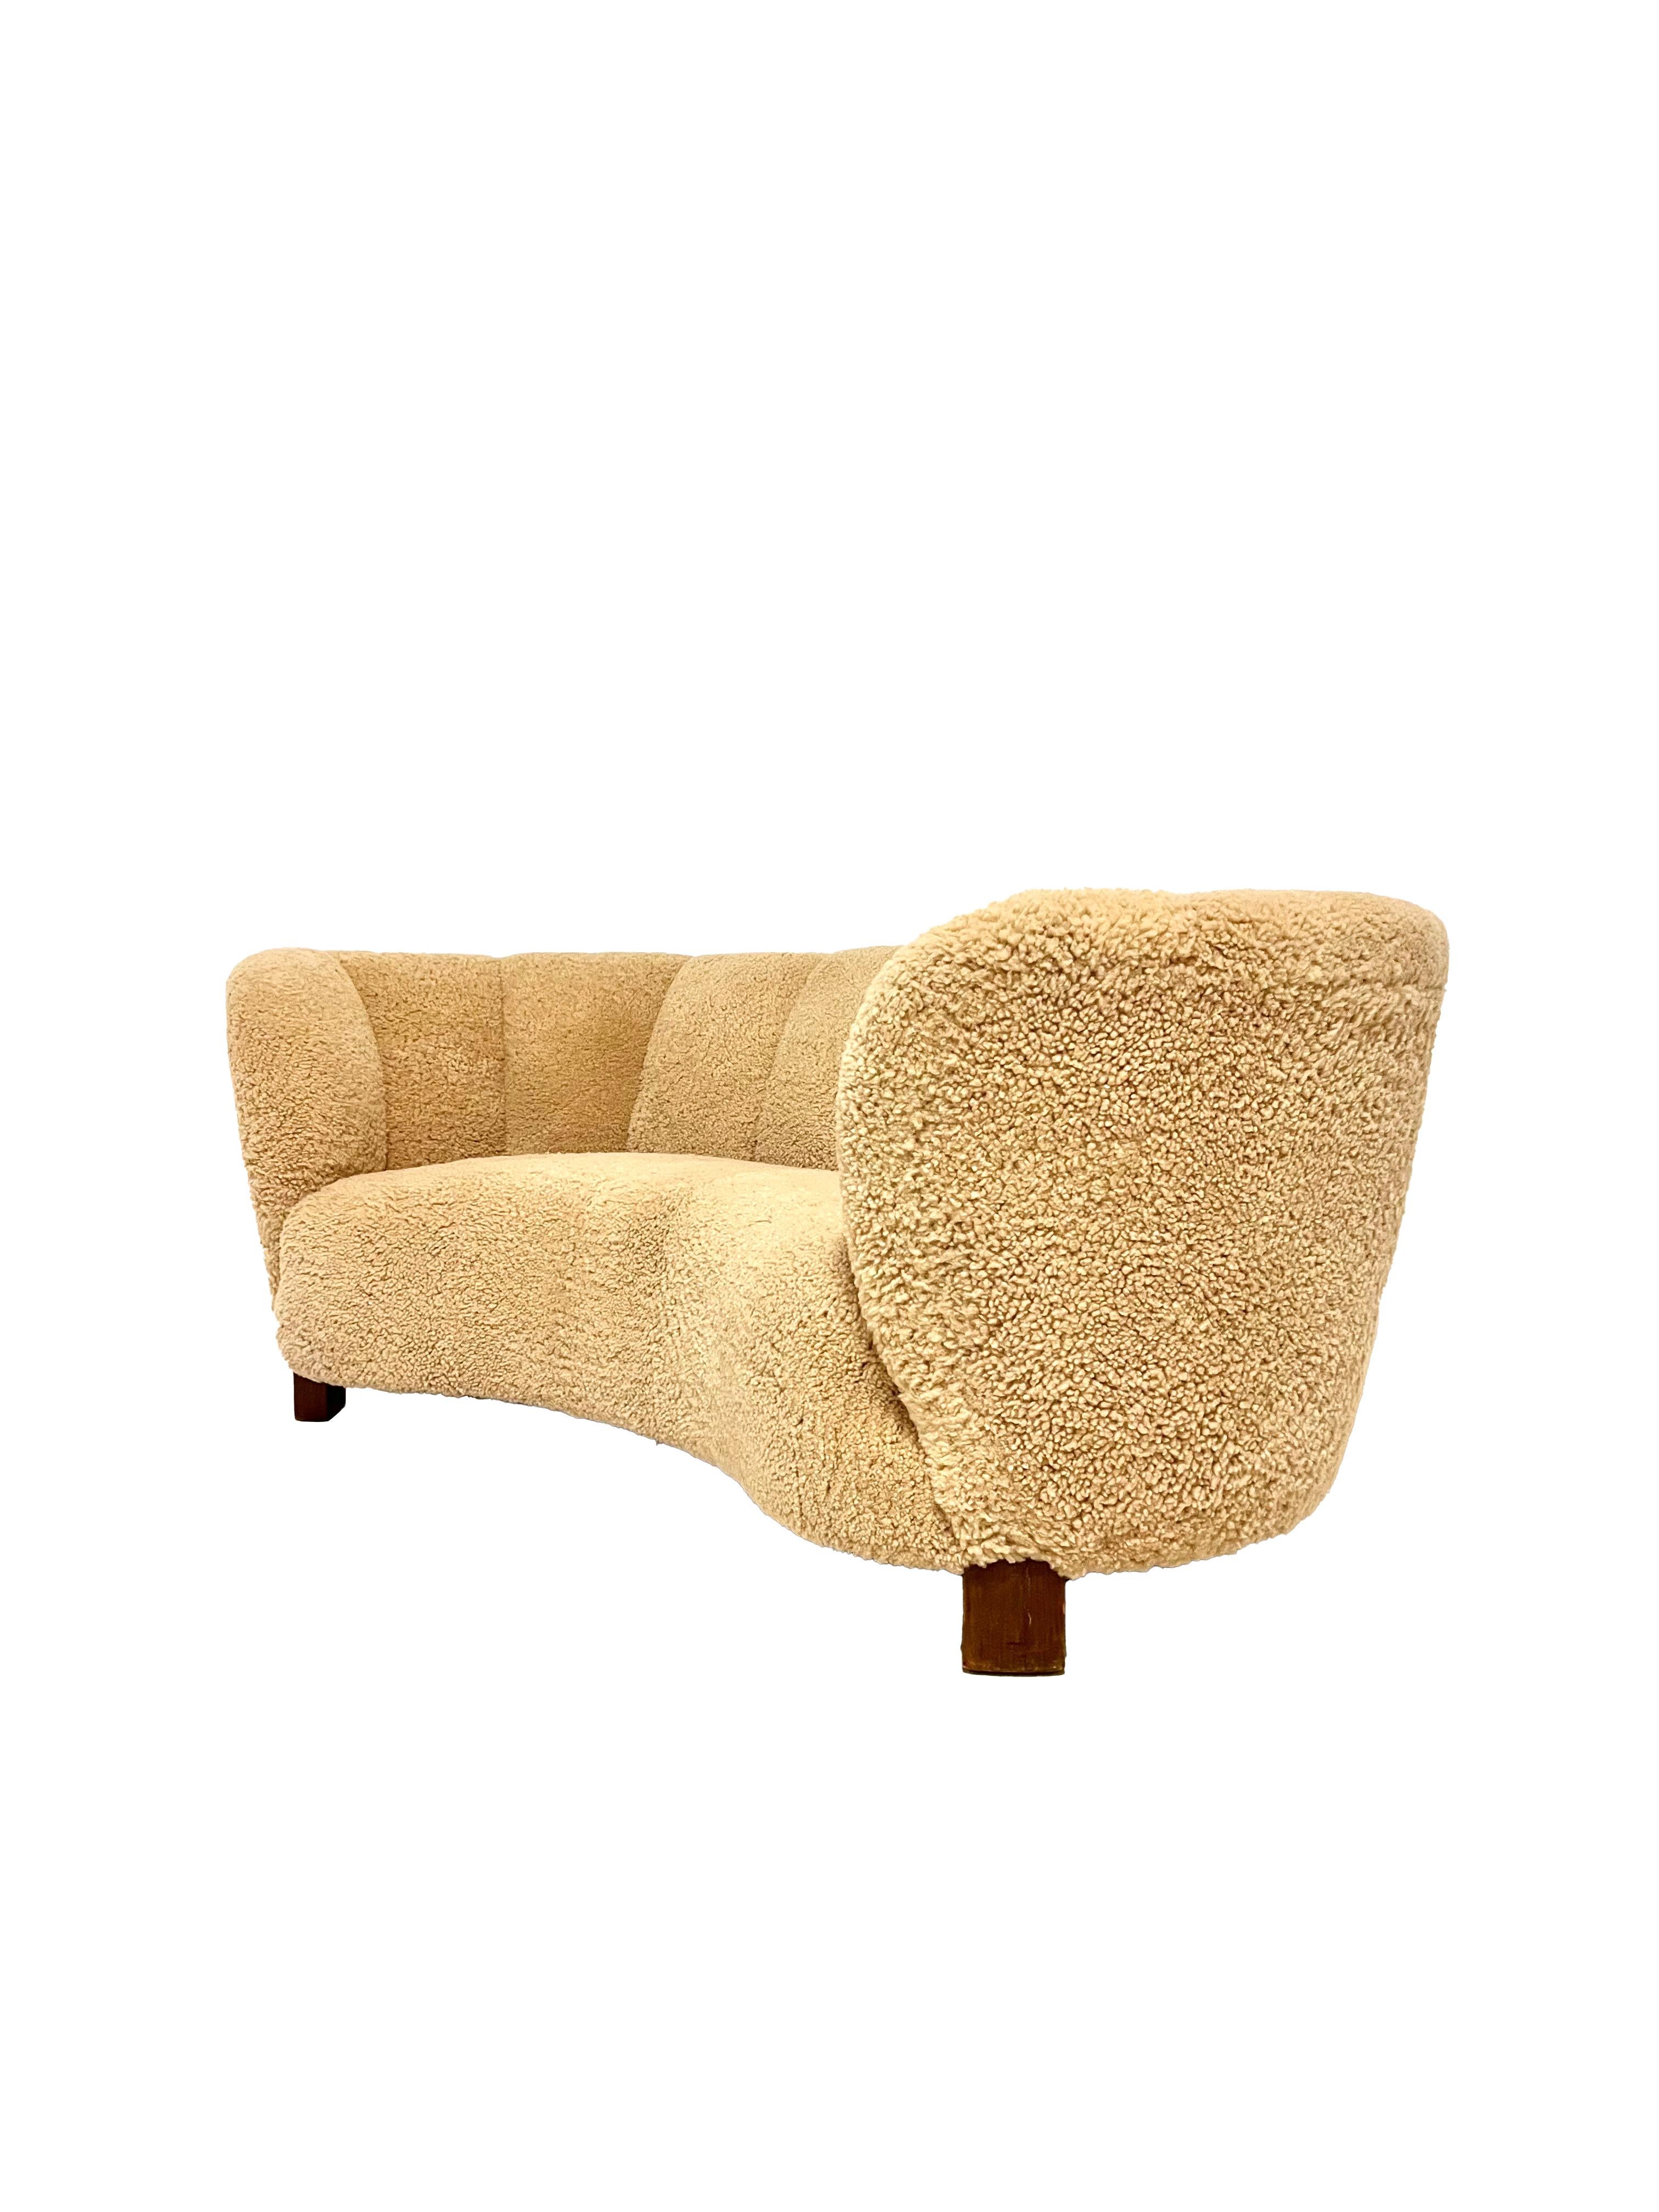 Danish 3 Seater Curved Sofa, Attributed to Fritz Hansen, Denmark C. 1930’s in Shearling